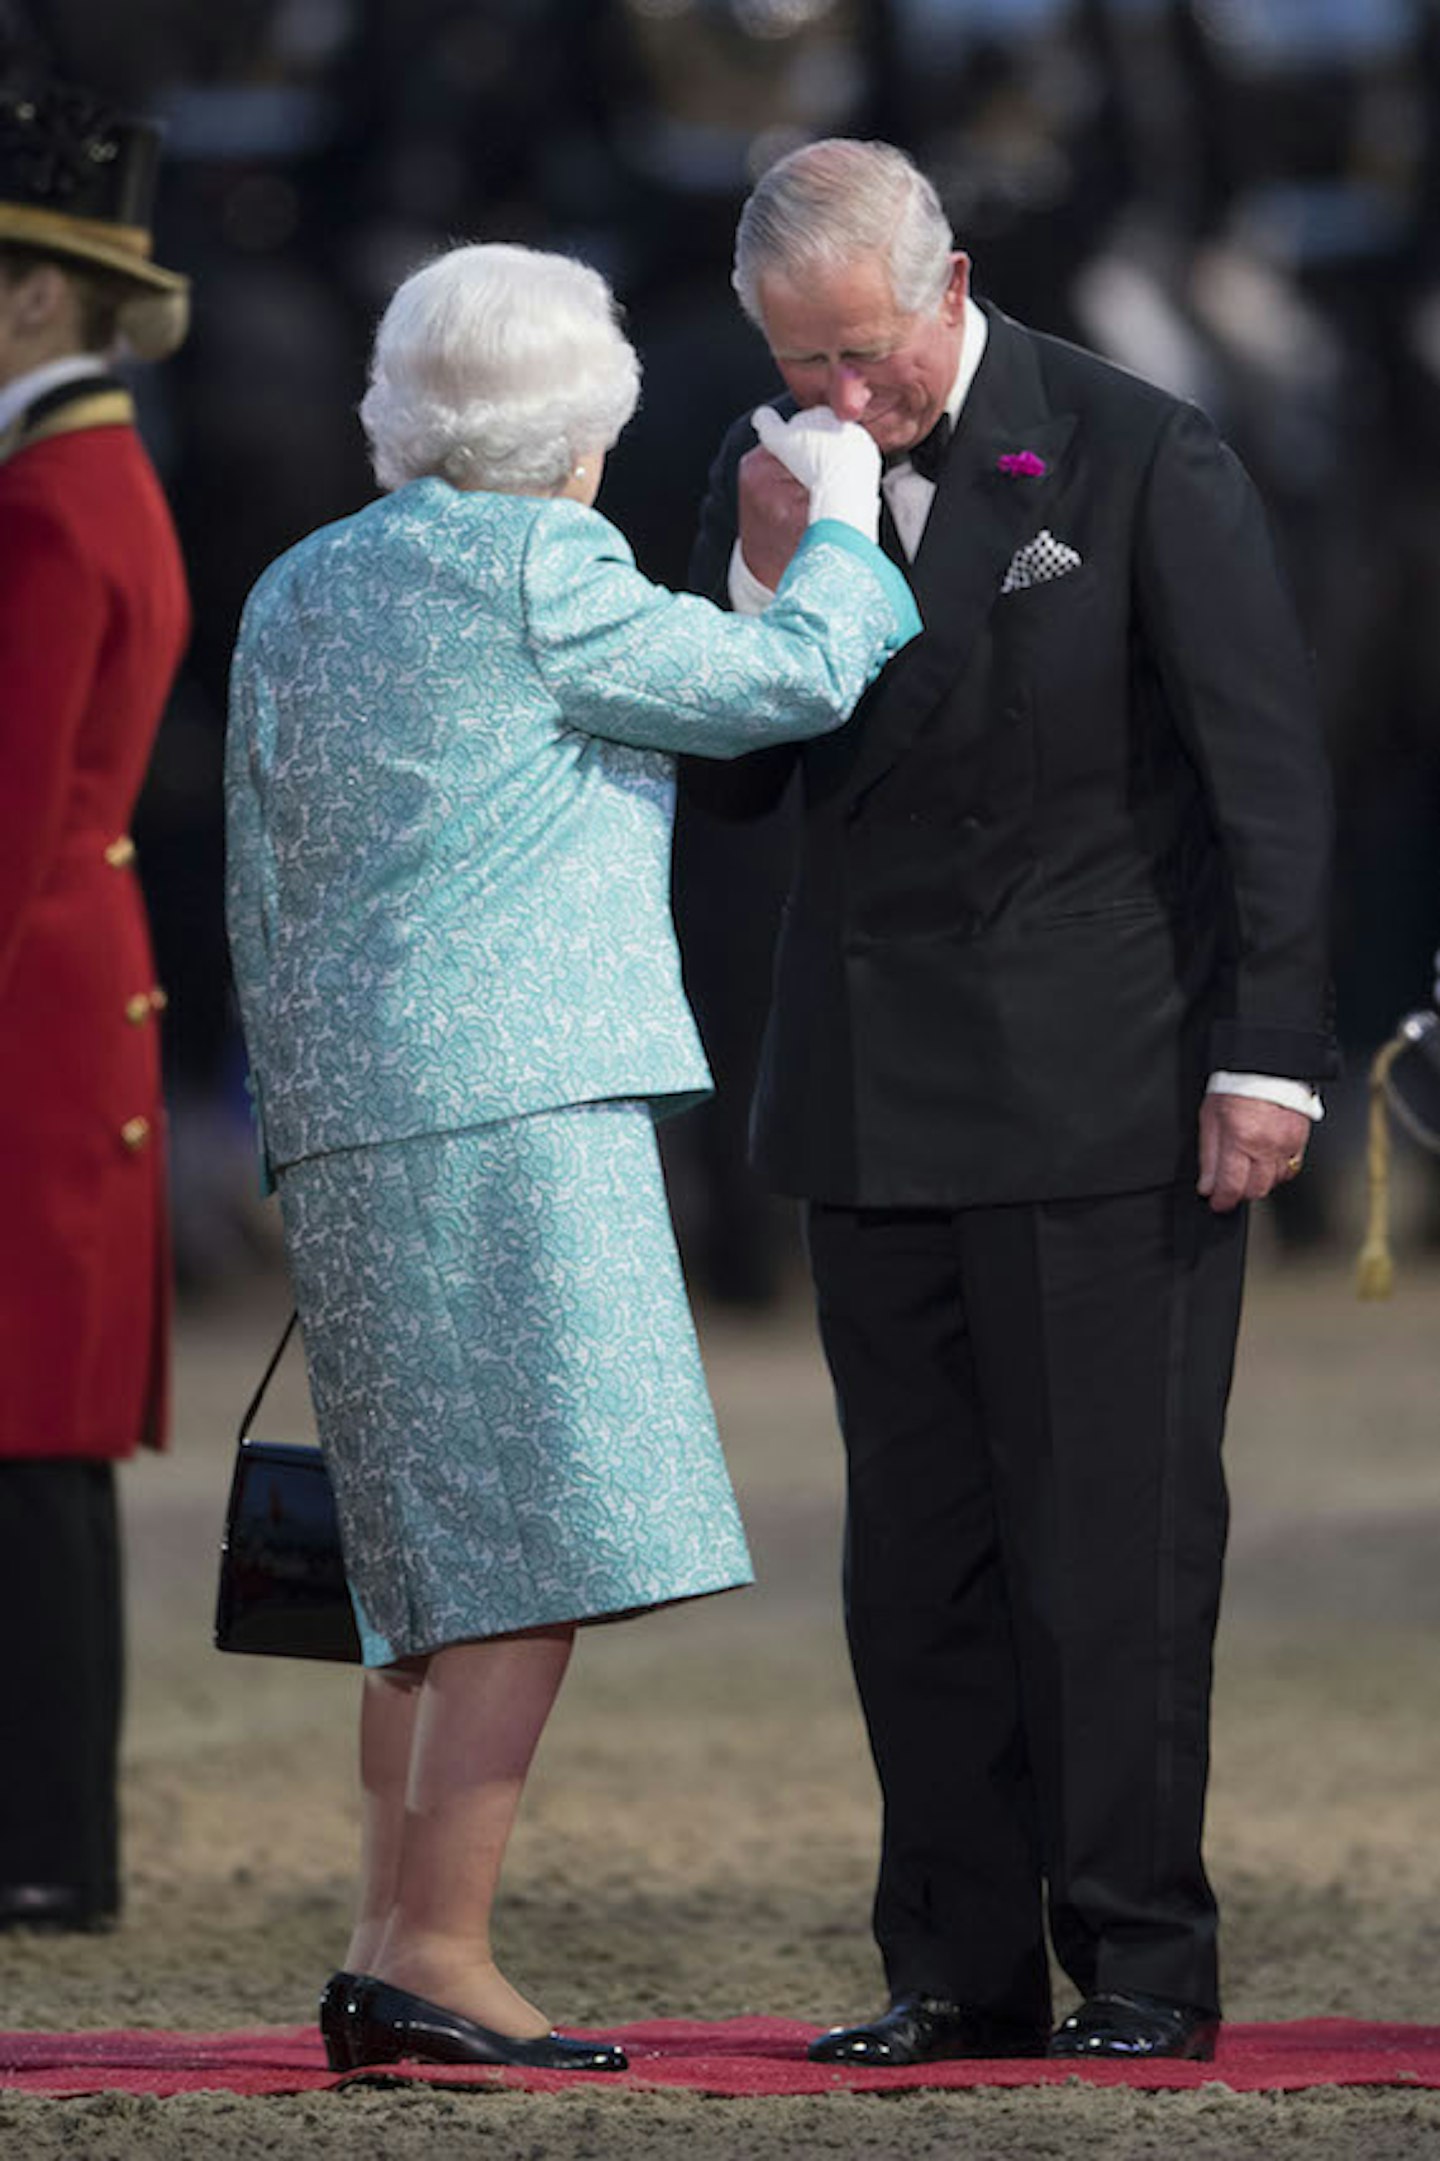 The Queen, Prince Charles